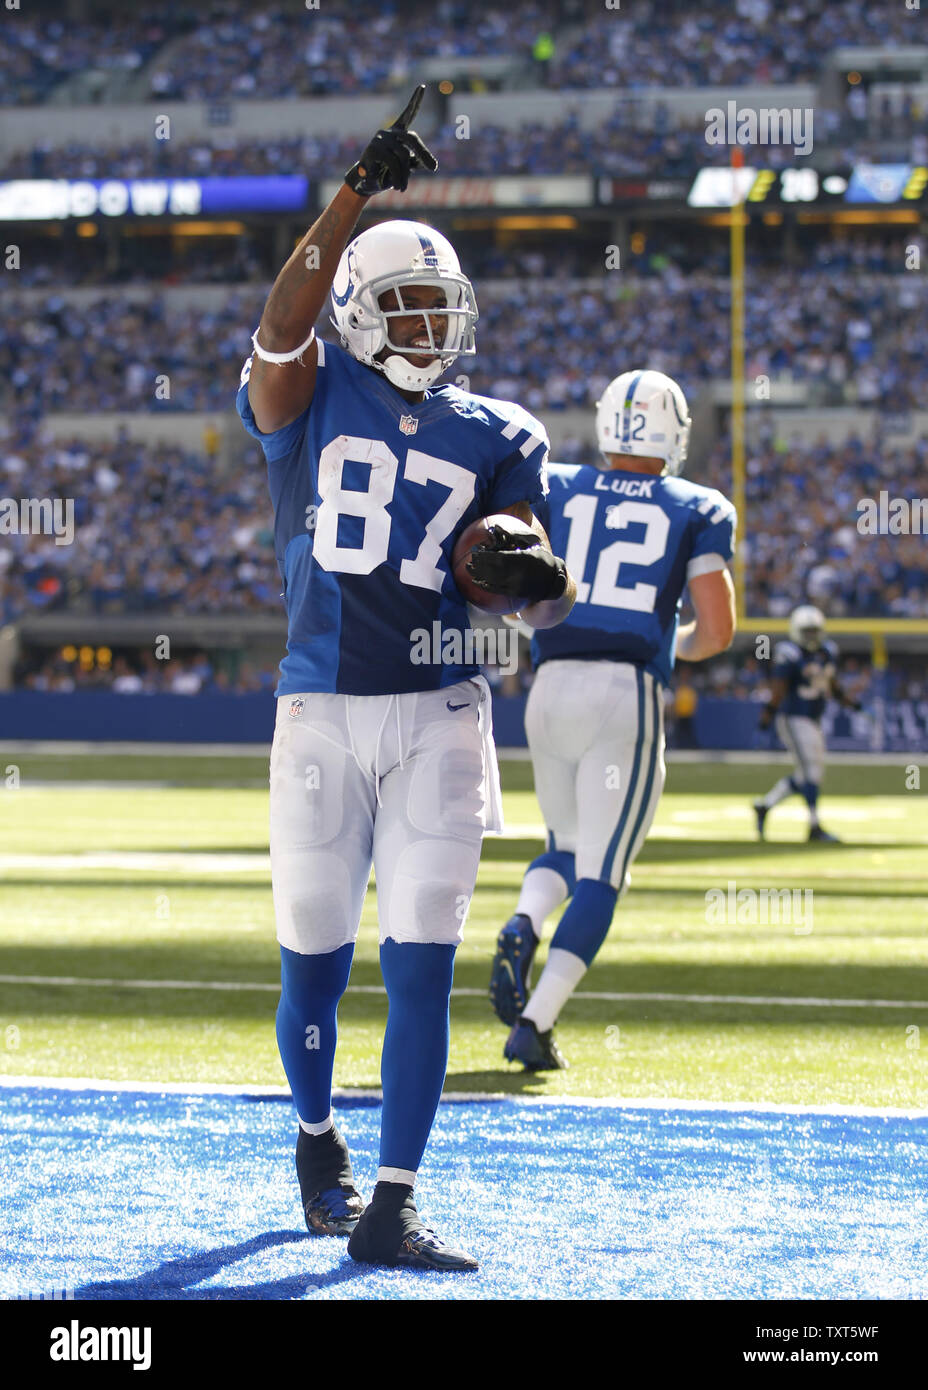 Indianapolis Colts wide receiver Reggie Wayne (87) celebrates his touchdown against theTennessee Titans during the second half of play at Lucas Oil Stadium in Indianapolis, Indiana, September 28, 2014.       UPI/John Sommers II Stock Photo